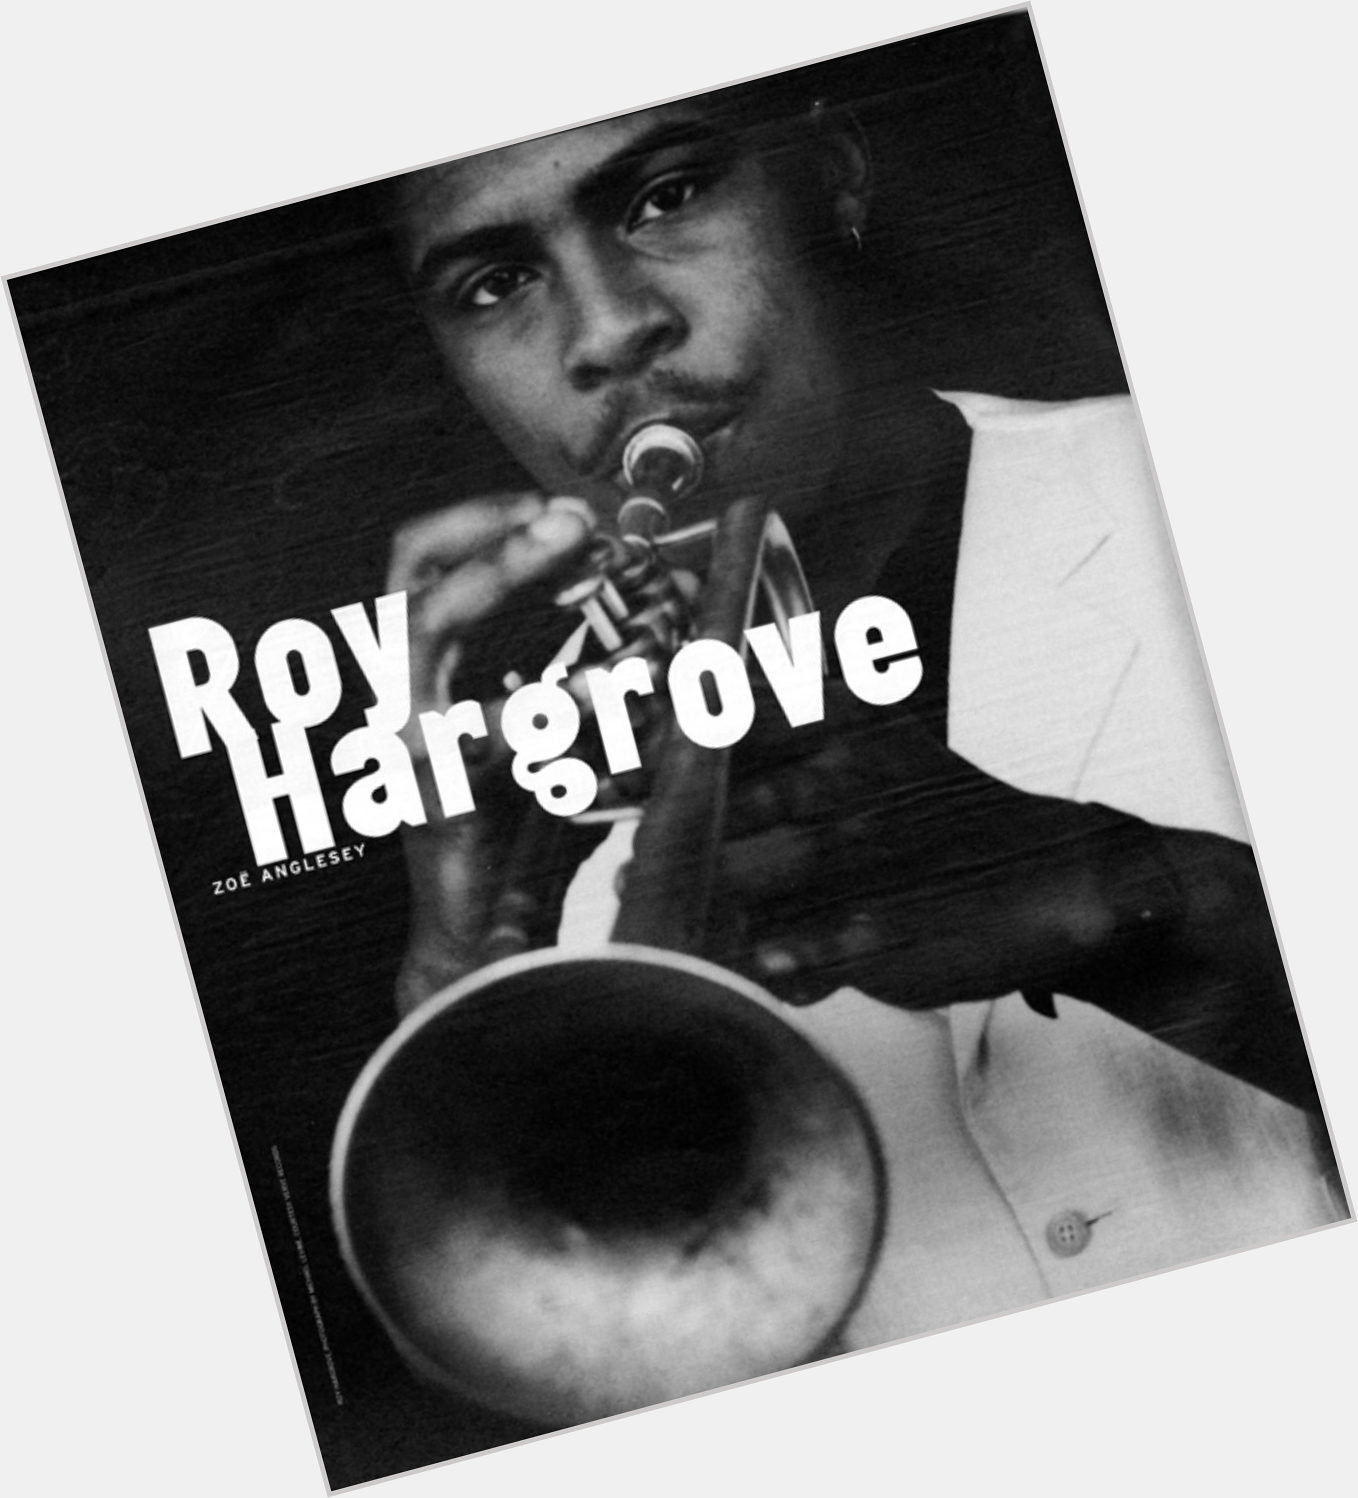 Http://fanpagepress.net/m/R/Roy Hargrove Hairstyle 4